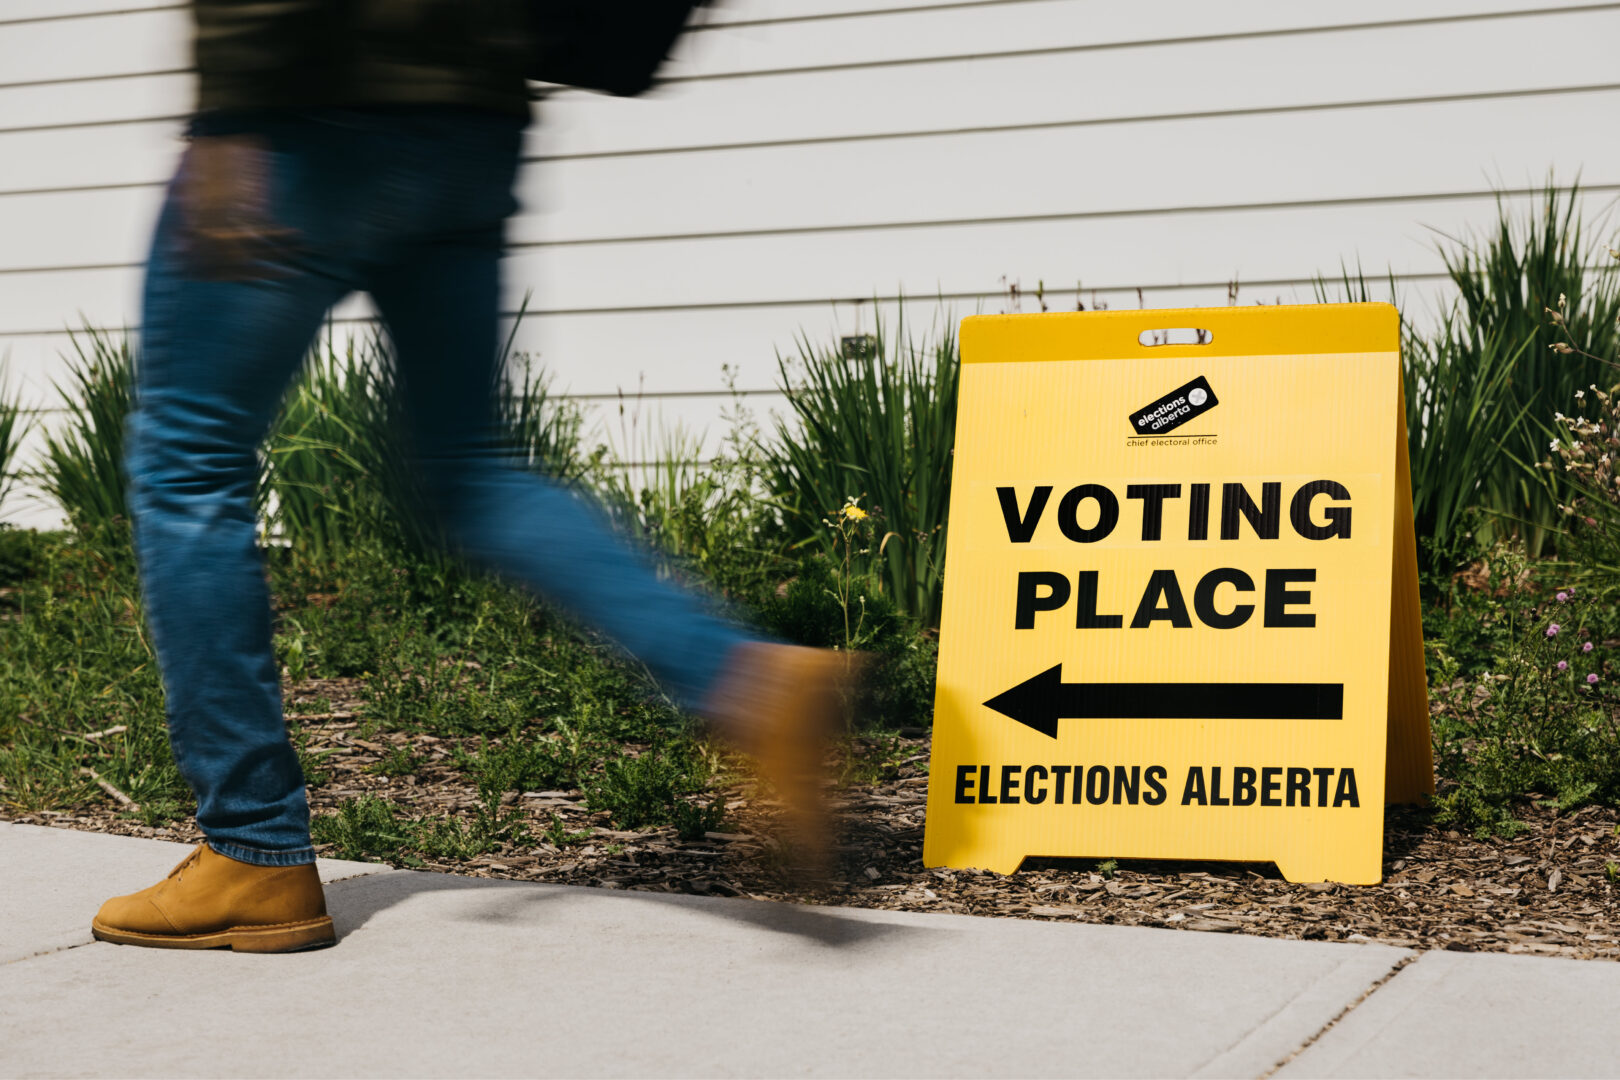 Provincial election candidate nominations close